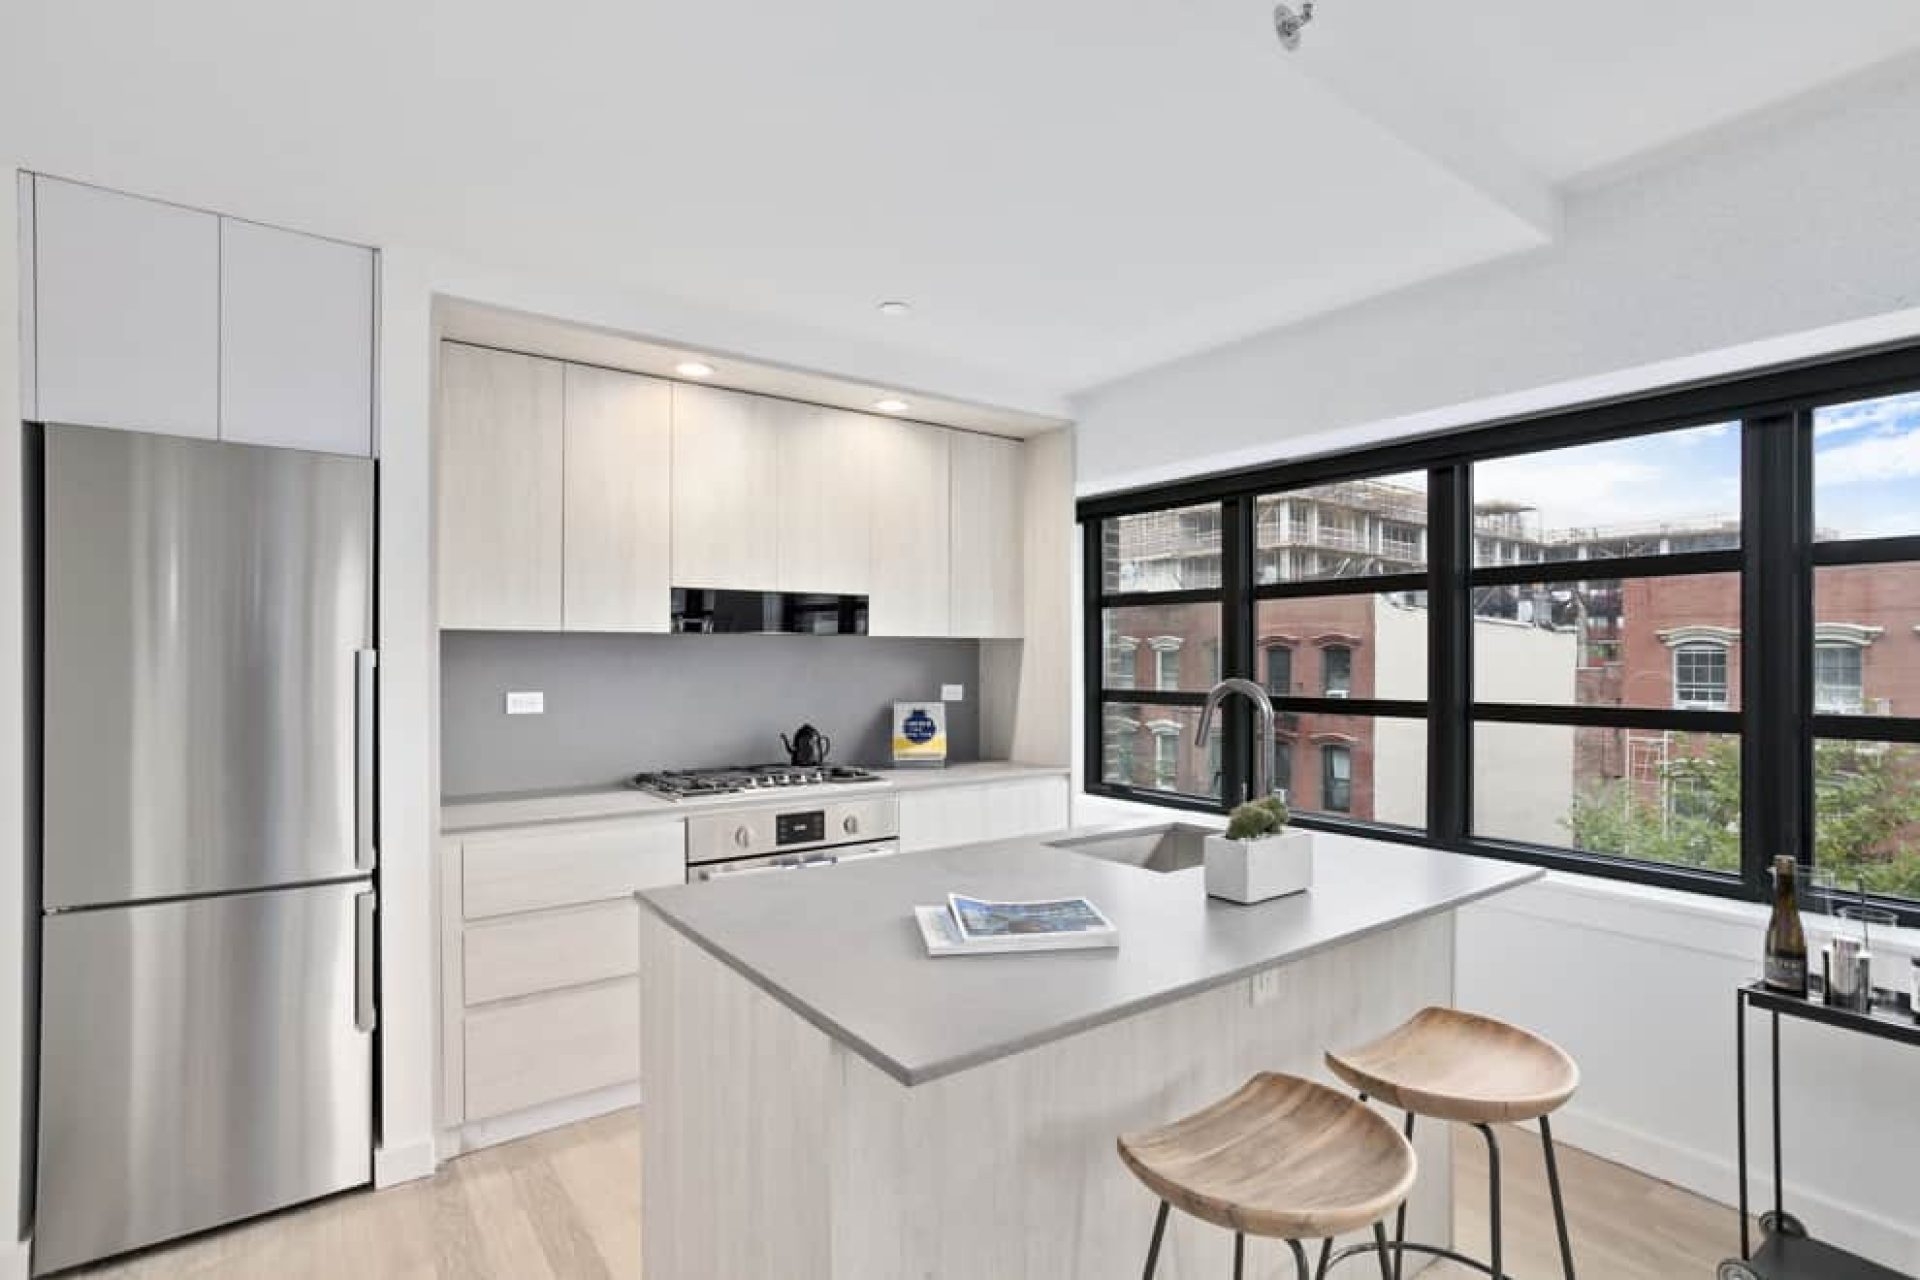 Kitchen at 66 Ainslie Street apartments with a kitchen island, bar seating, stone countertops and stainless steel appliances.